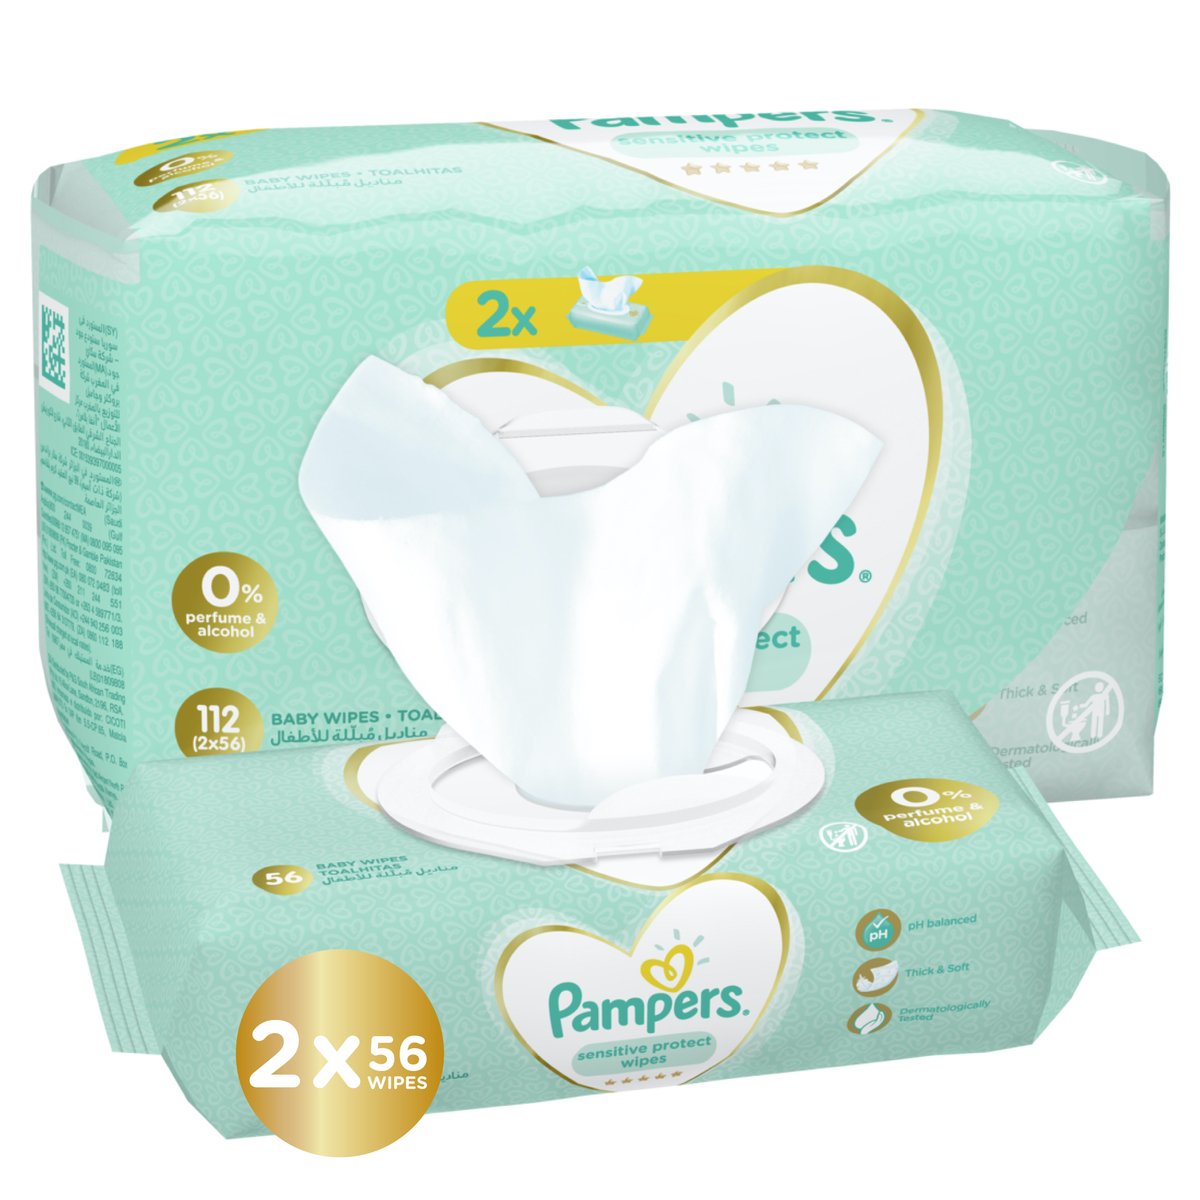 Pampers Baby Wipes Sensitive 2 x 56pcs